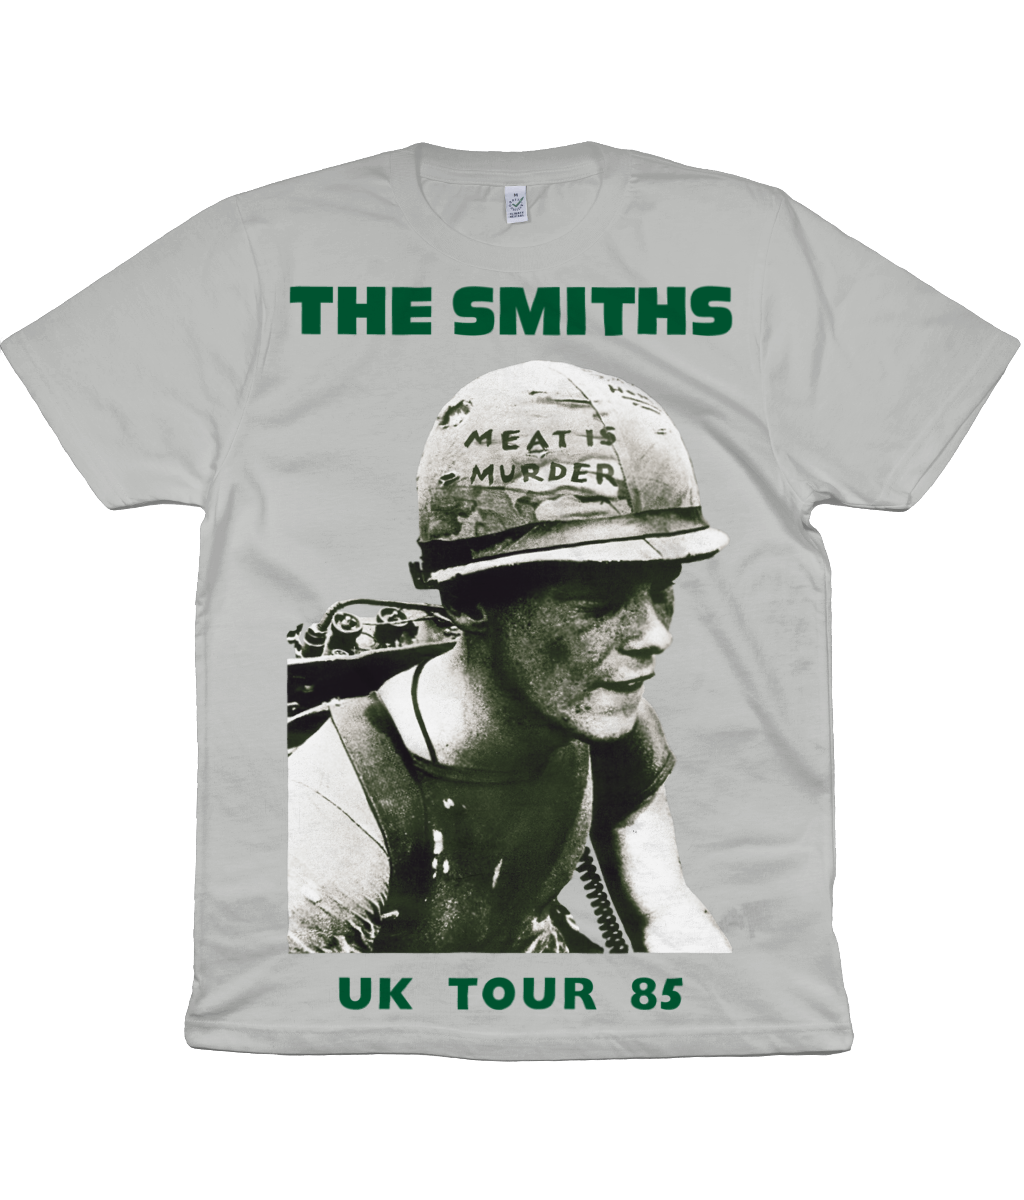 THE SMITHS - MEAT IS MURDER TOUR 1985 - Soldier - Green Text - Version 2